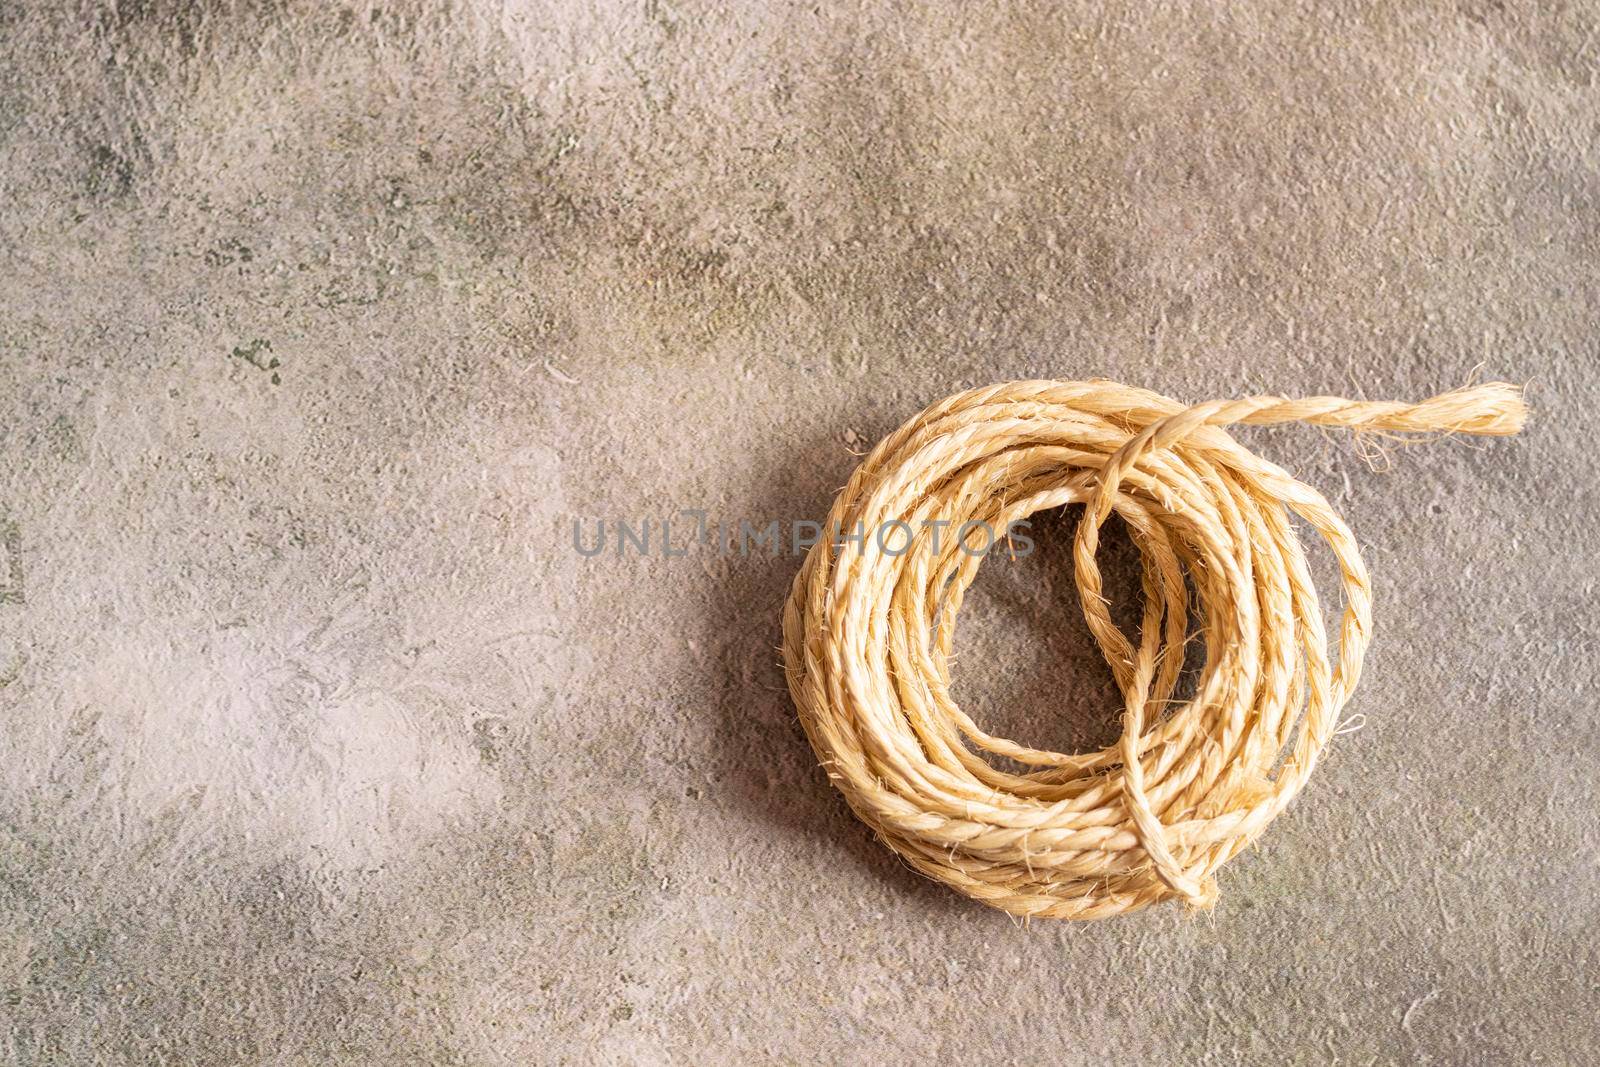 View of a roll of rope on a golden background by eagg13